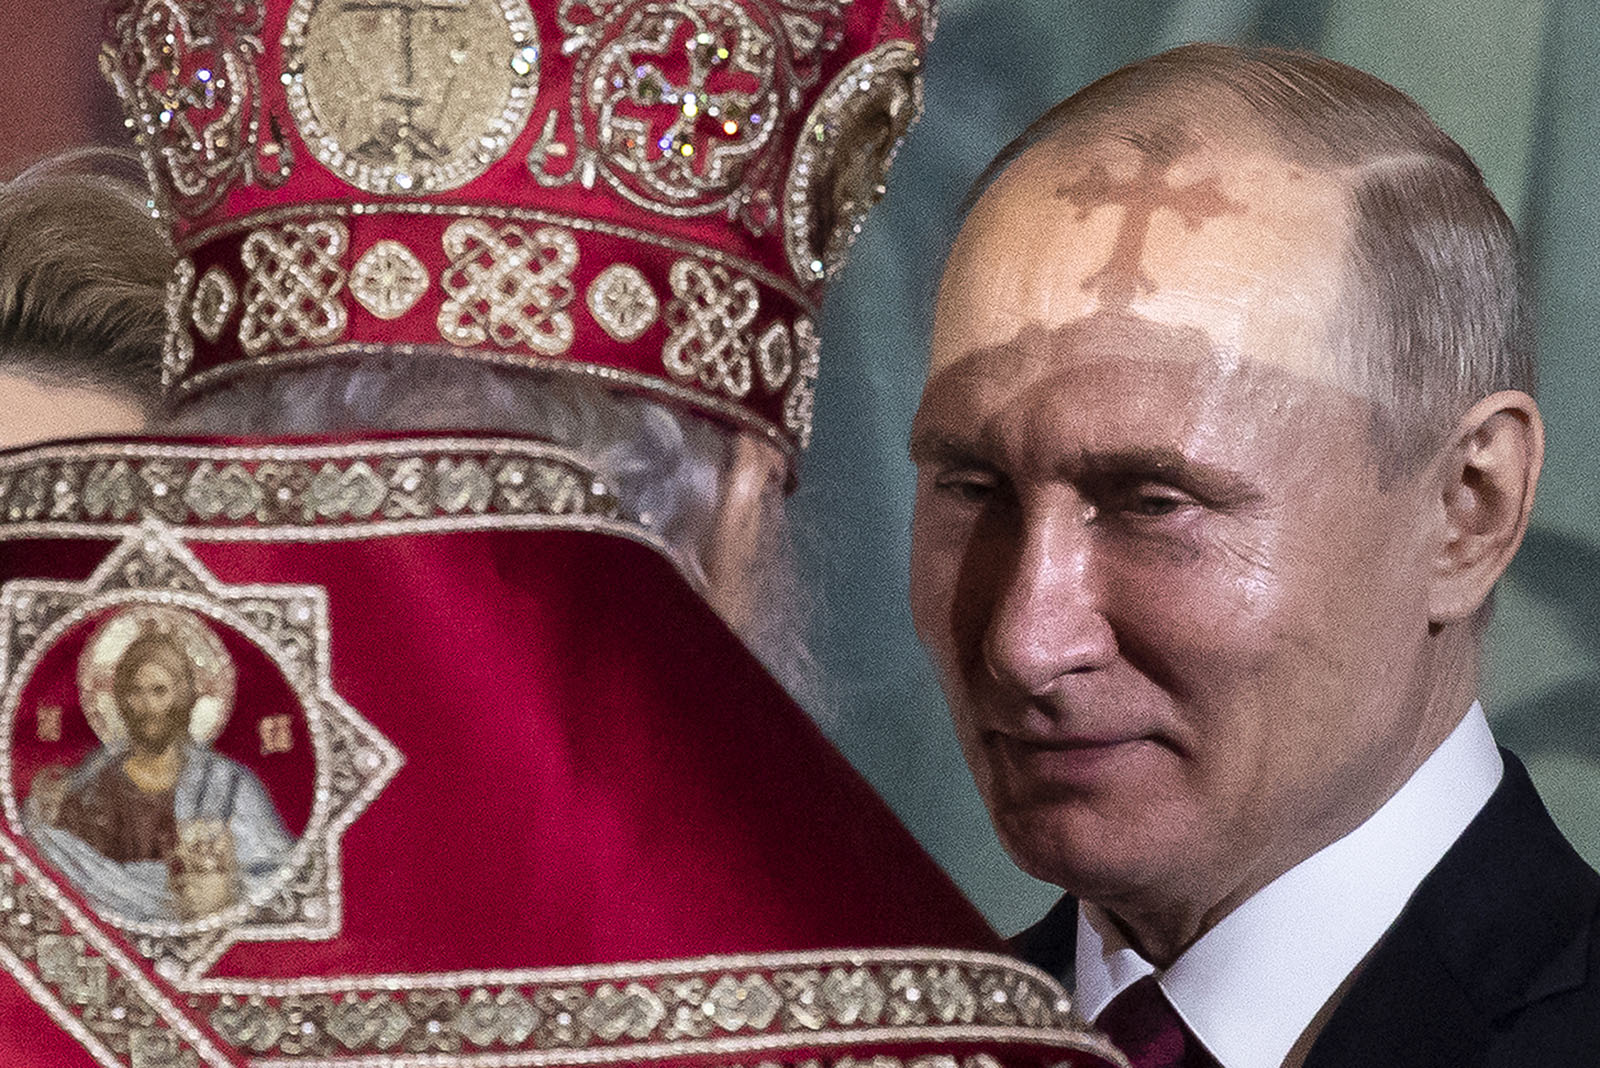 Russian Orthodox Patriarch Kirill, left, talks to President Vladimir Putin, right, during the Easter service in the Christ the Savior Cathedral in Moscow, Russia, Sunday, April 28, 2019. Orthodox Christians around the world celebrated Easter on Sunday, April 28. (AP Photo/Alexander Zemlianichenko)